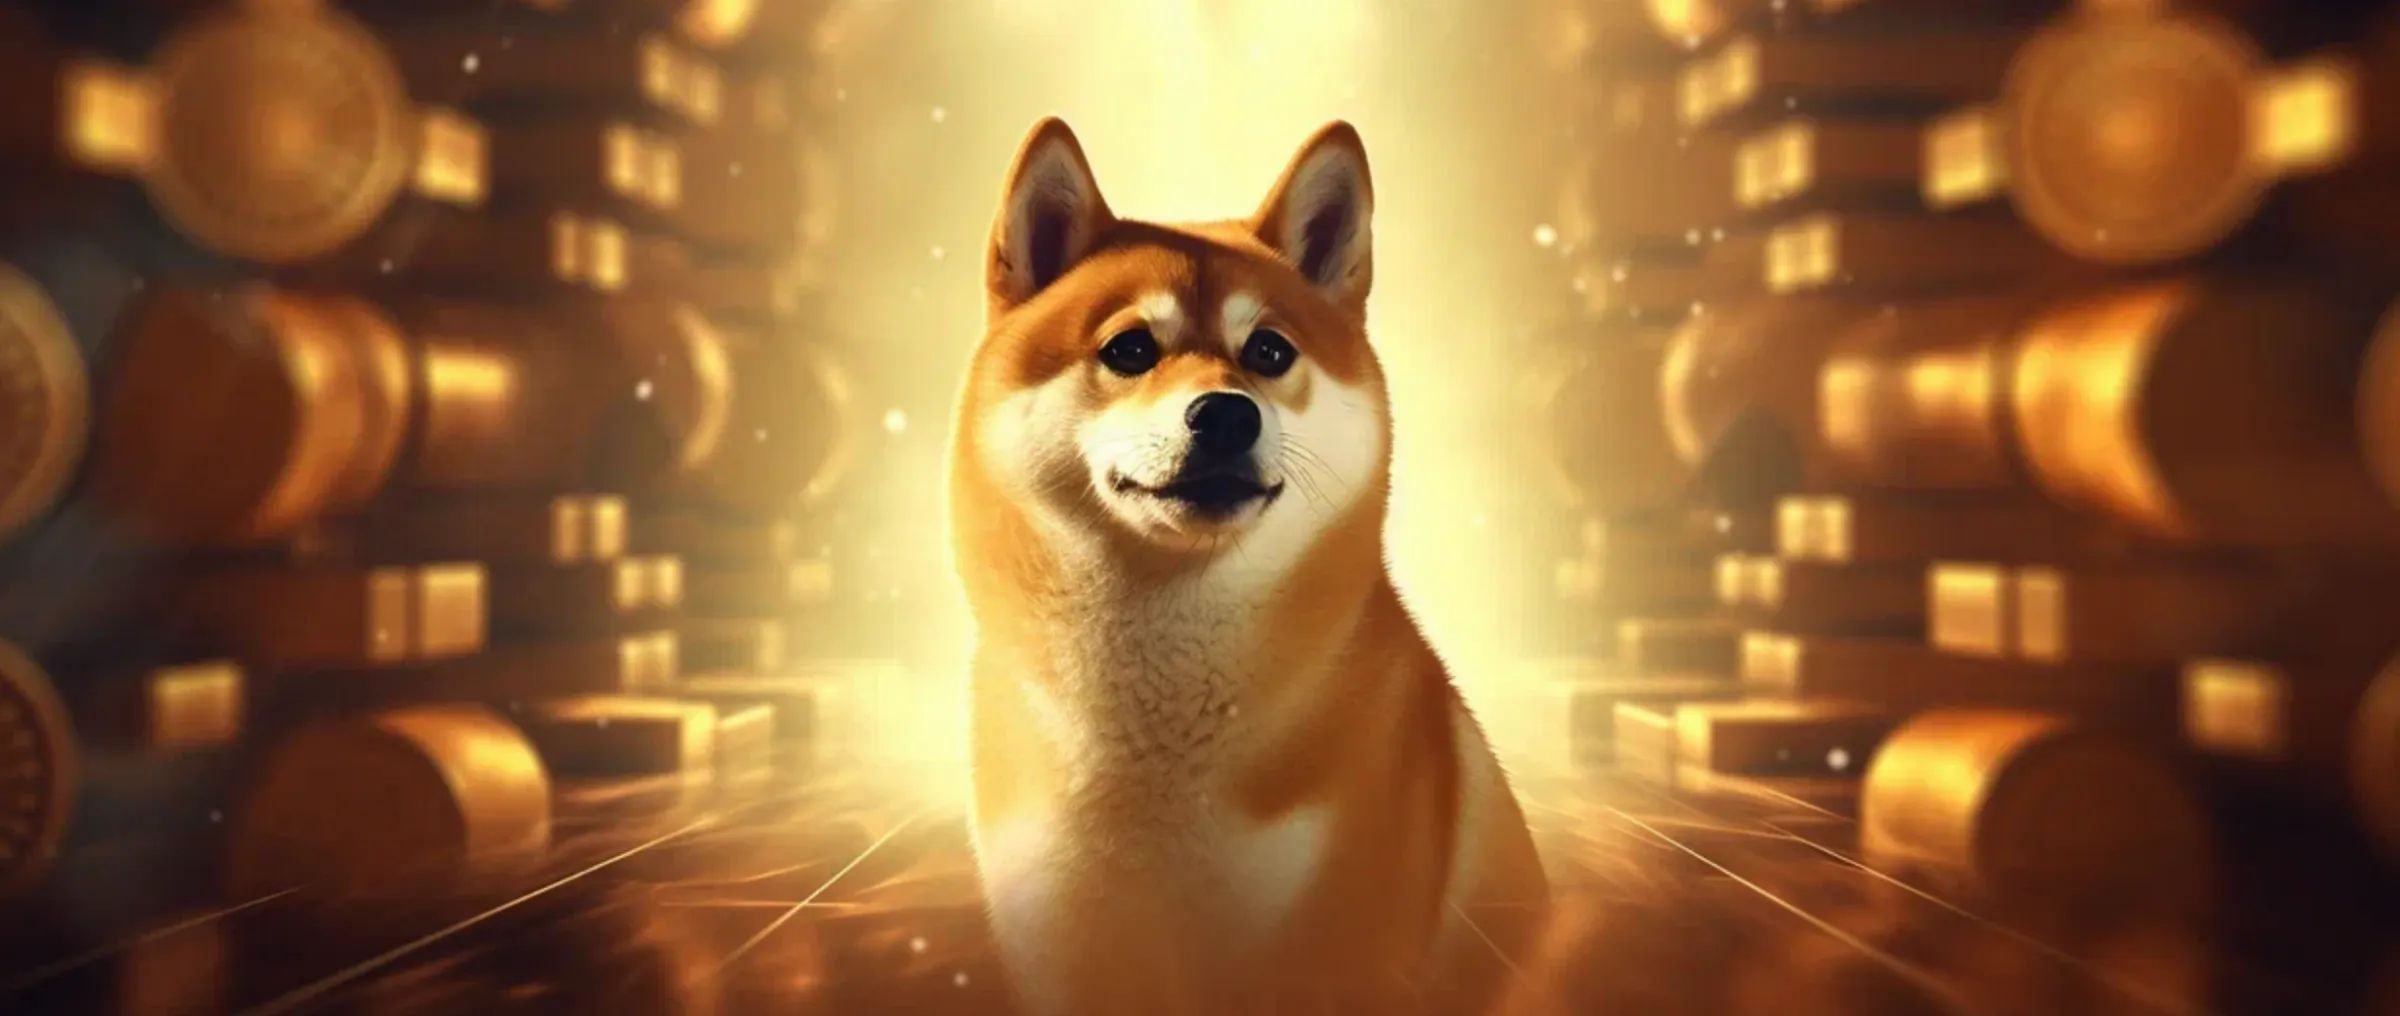 Interest in DOGE has now exceeded the $1 billion mark